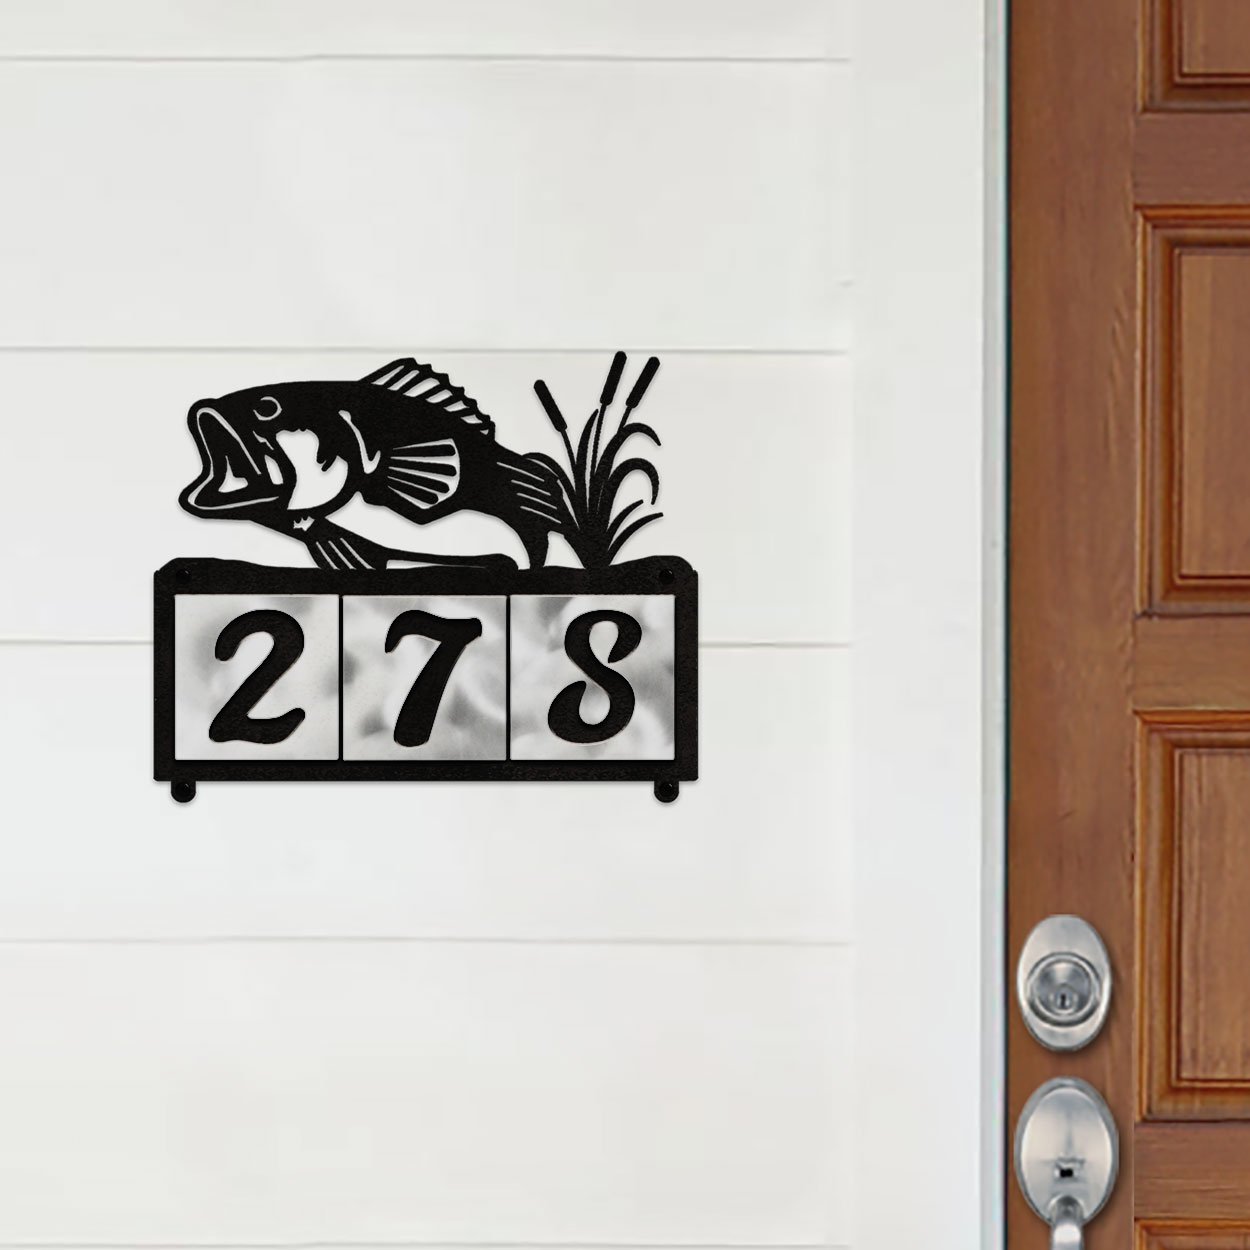 609003 - XL Jumping Bass in Reeds Design 3-Digit Horizontal 6in Tile Outdoor House Numbers